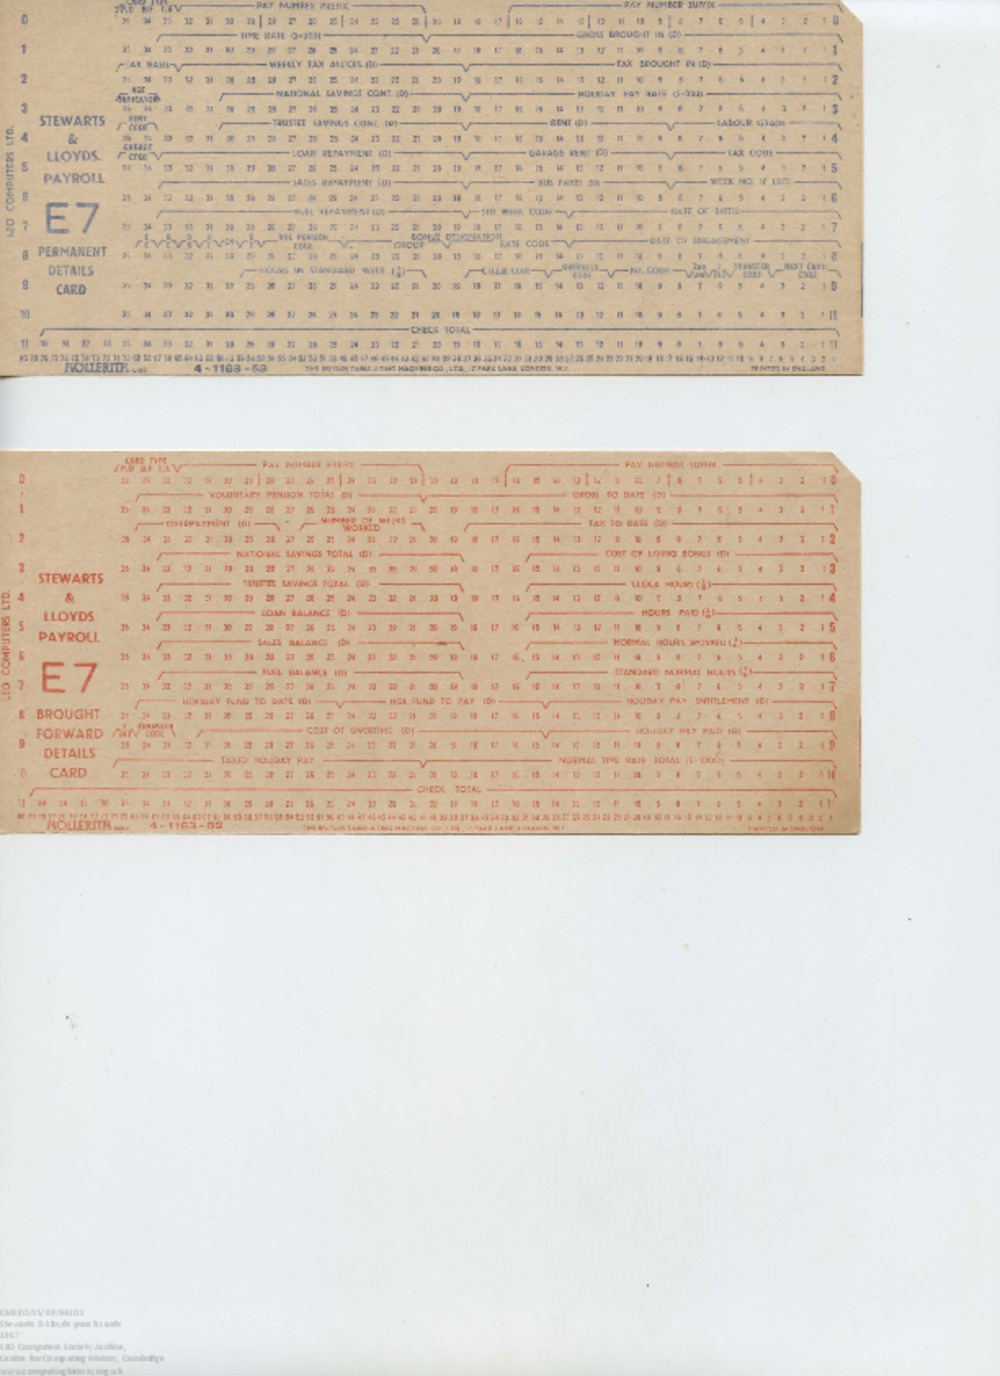 Article: 66103 Hollerith Punch cards